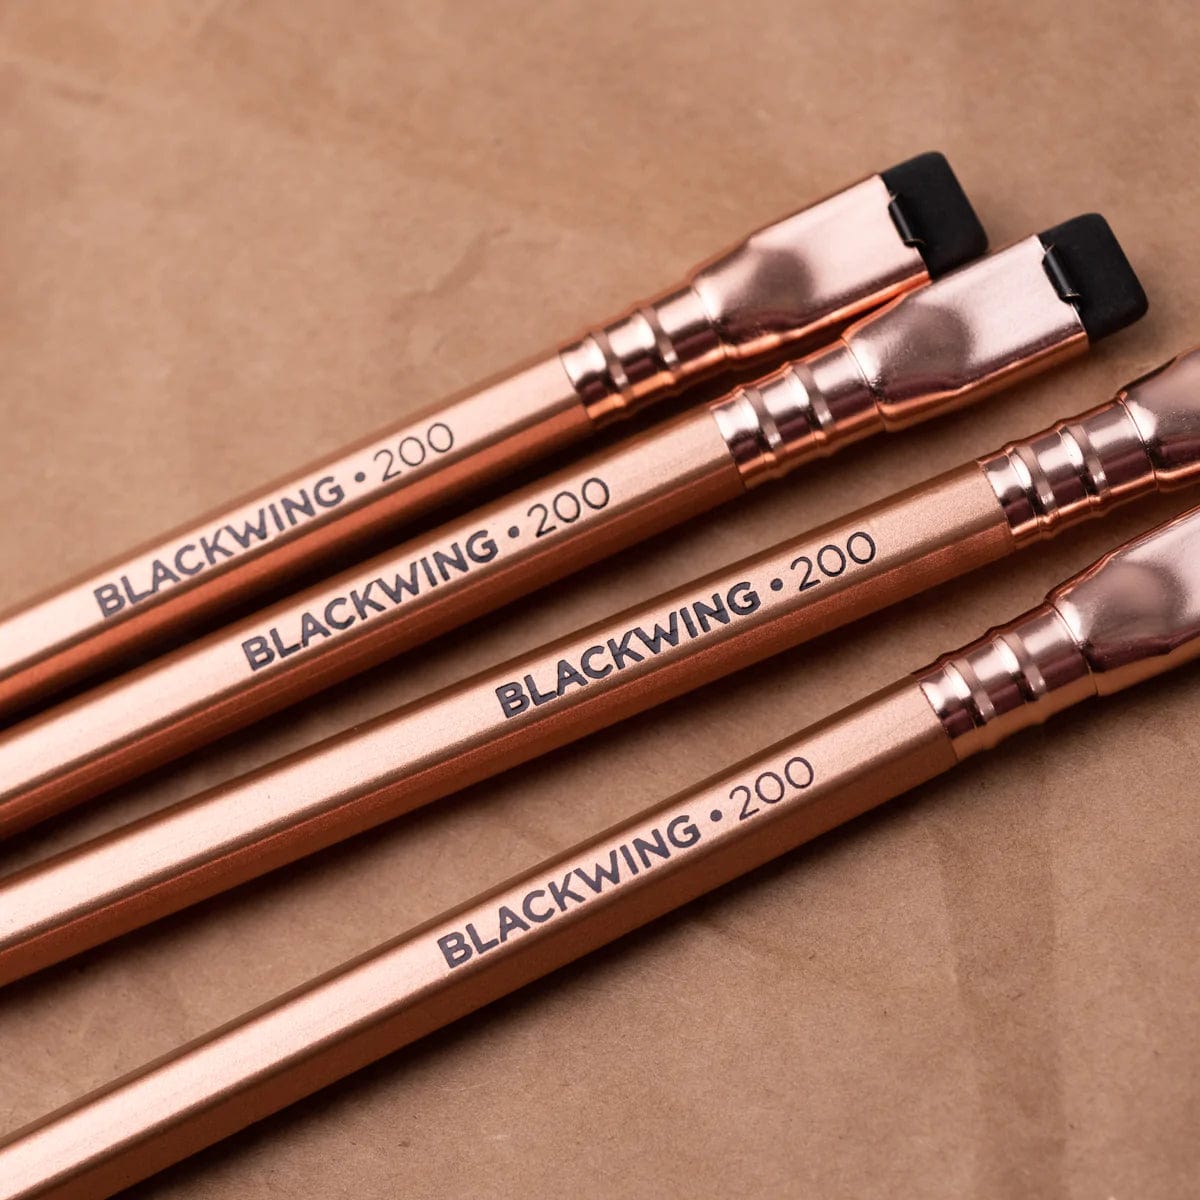 Blackwing Graphite Pencil Set Blackwing - Volume #200 - Coffeehouse Copper - Firm Pencils - Set of 12